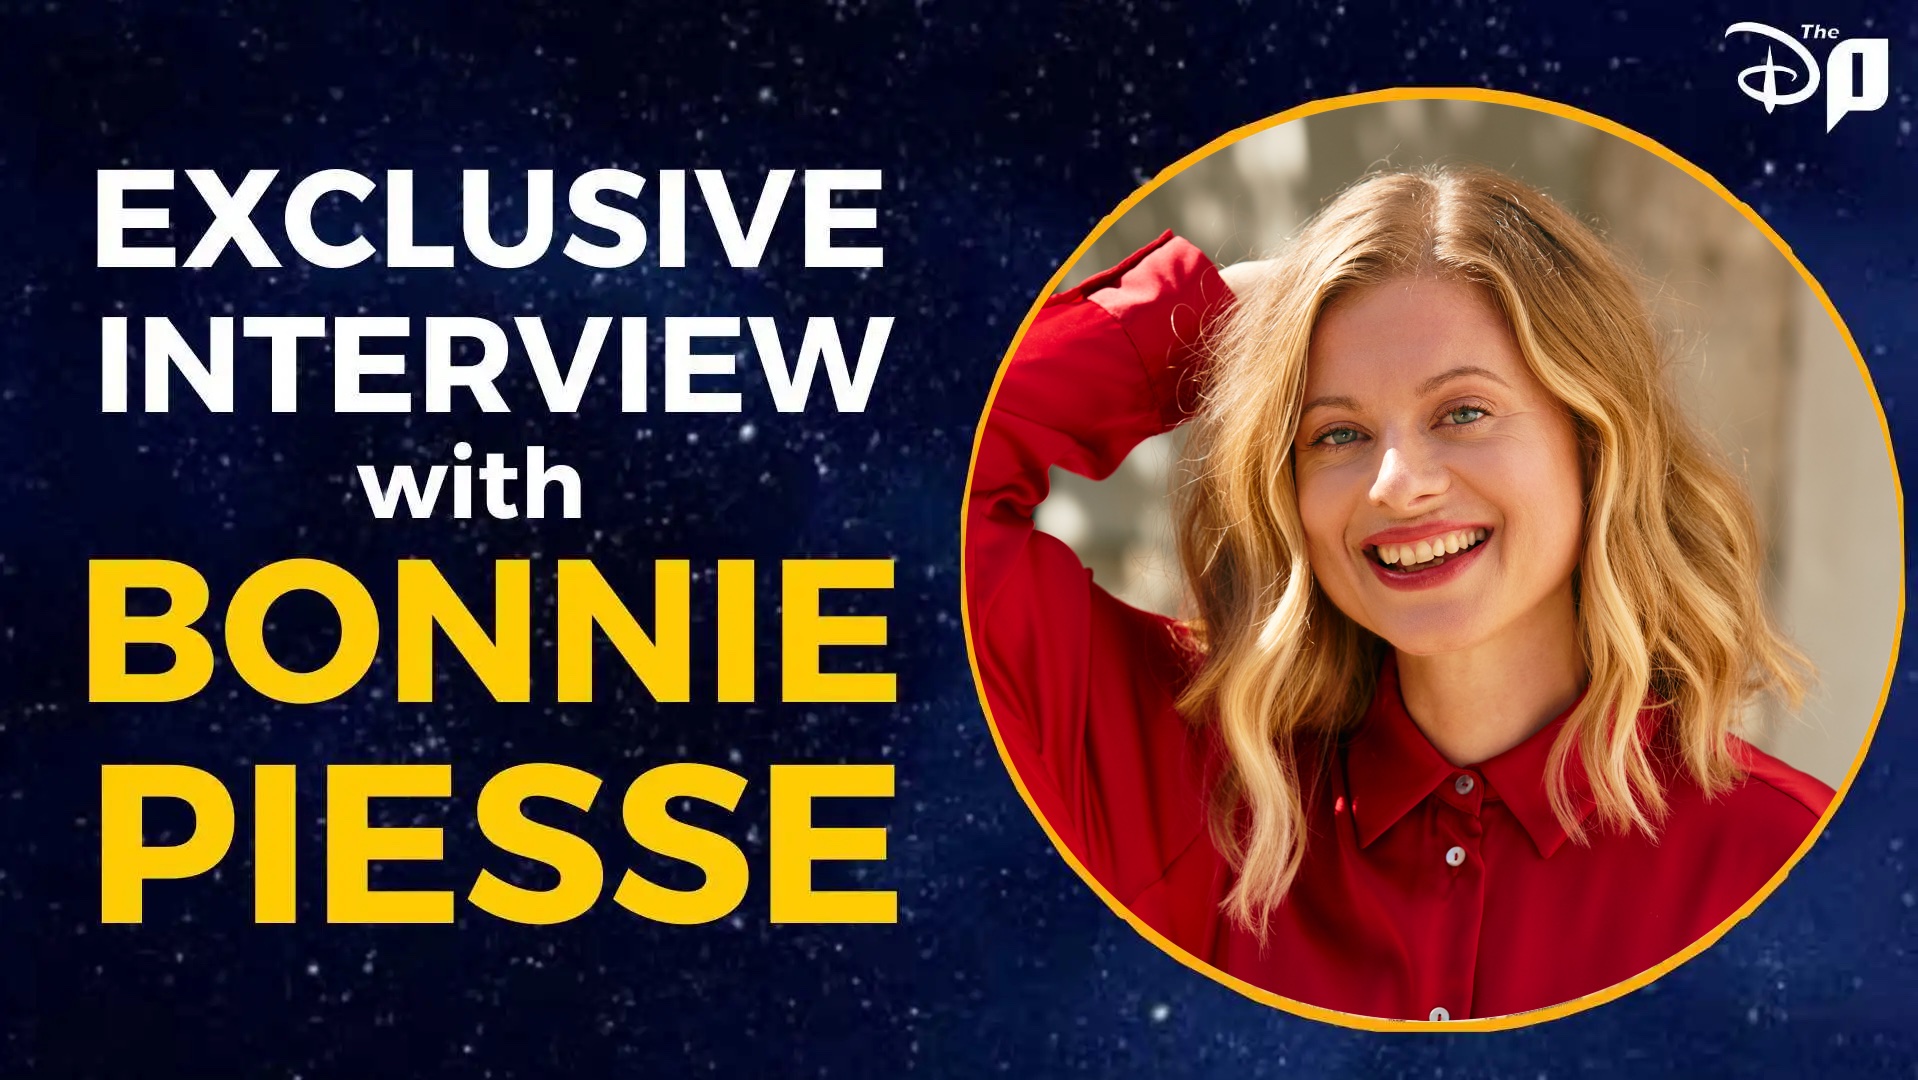 EXCLUSIVE: ‘Star Wars’ Actress Bonnie Piesse On Returning To The Franchise, What To Expect In ‘Obi-Wan Kenobi’